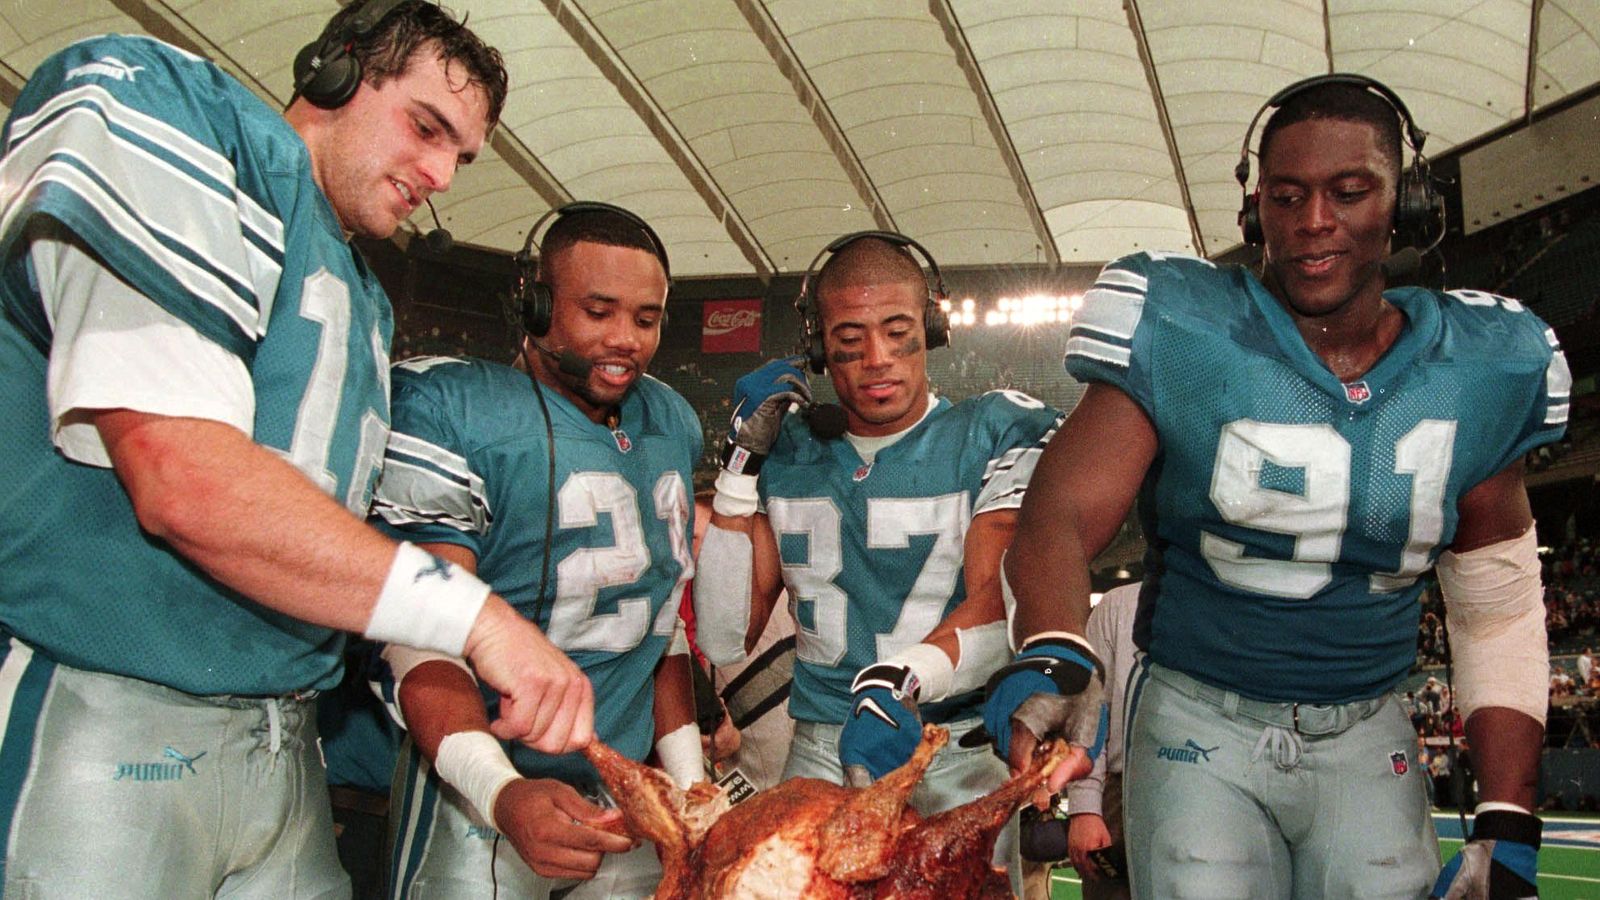 NFL Thanksgiving: Detroit Lions and Dallas Cowboys uphold league’s yearly tradition on US holiday